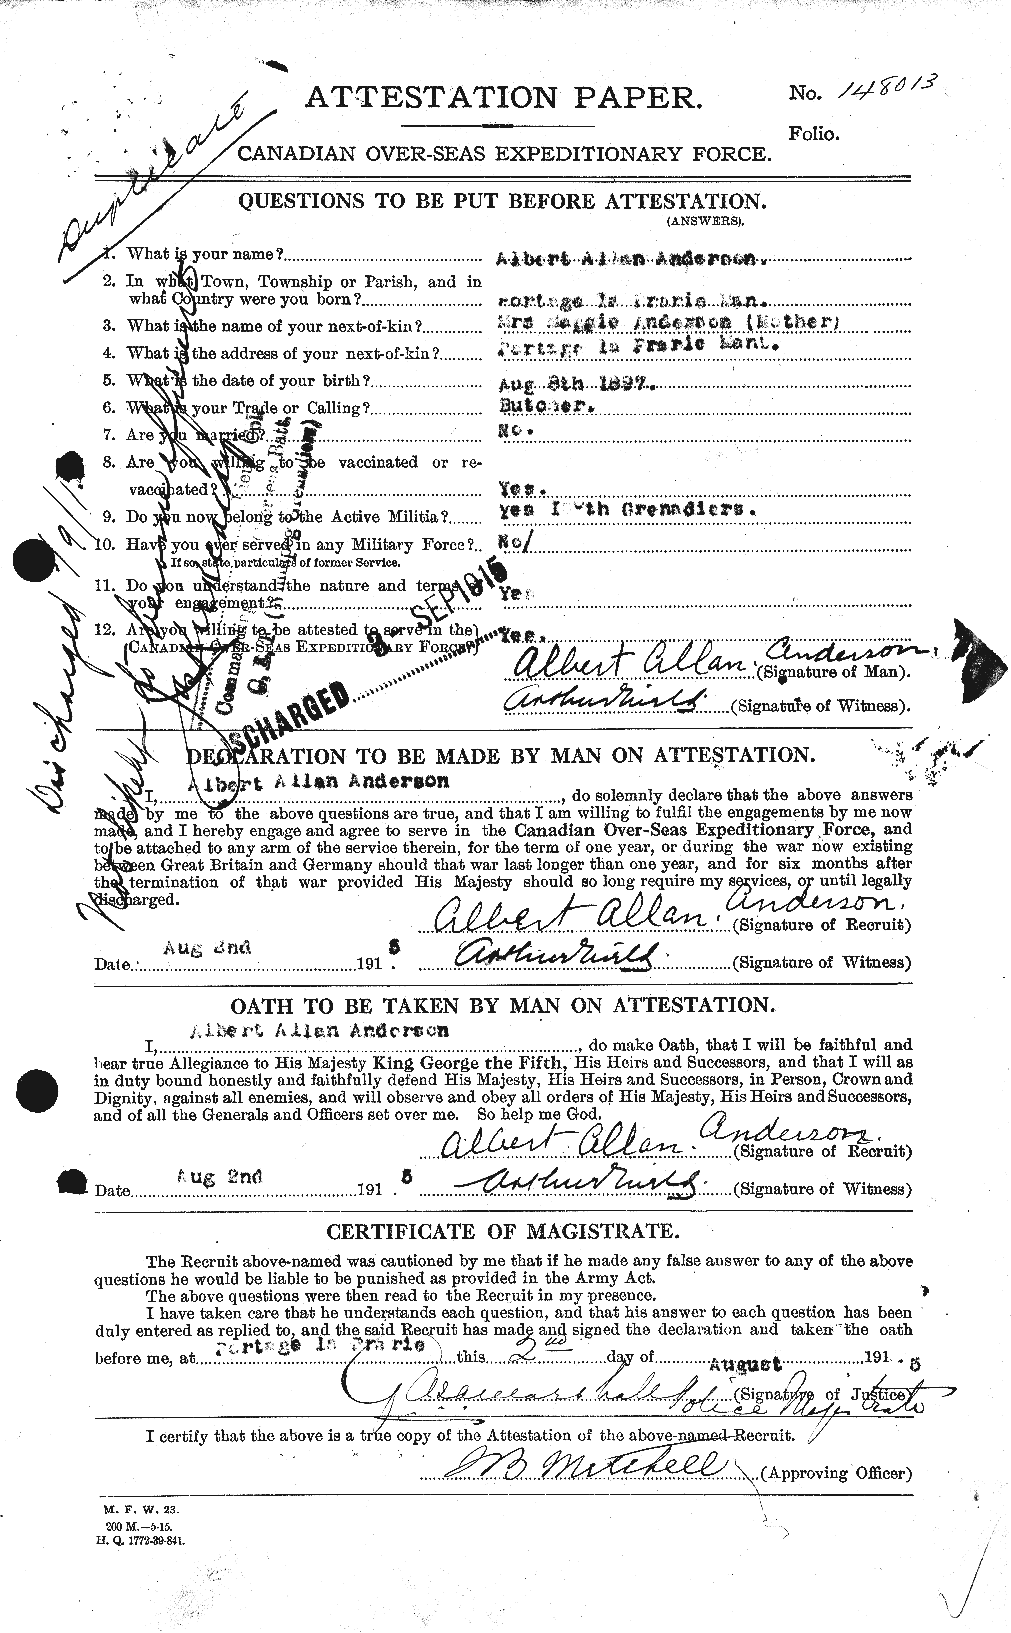 Personnel Records of the First World War - CEF 209549a